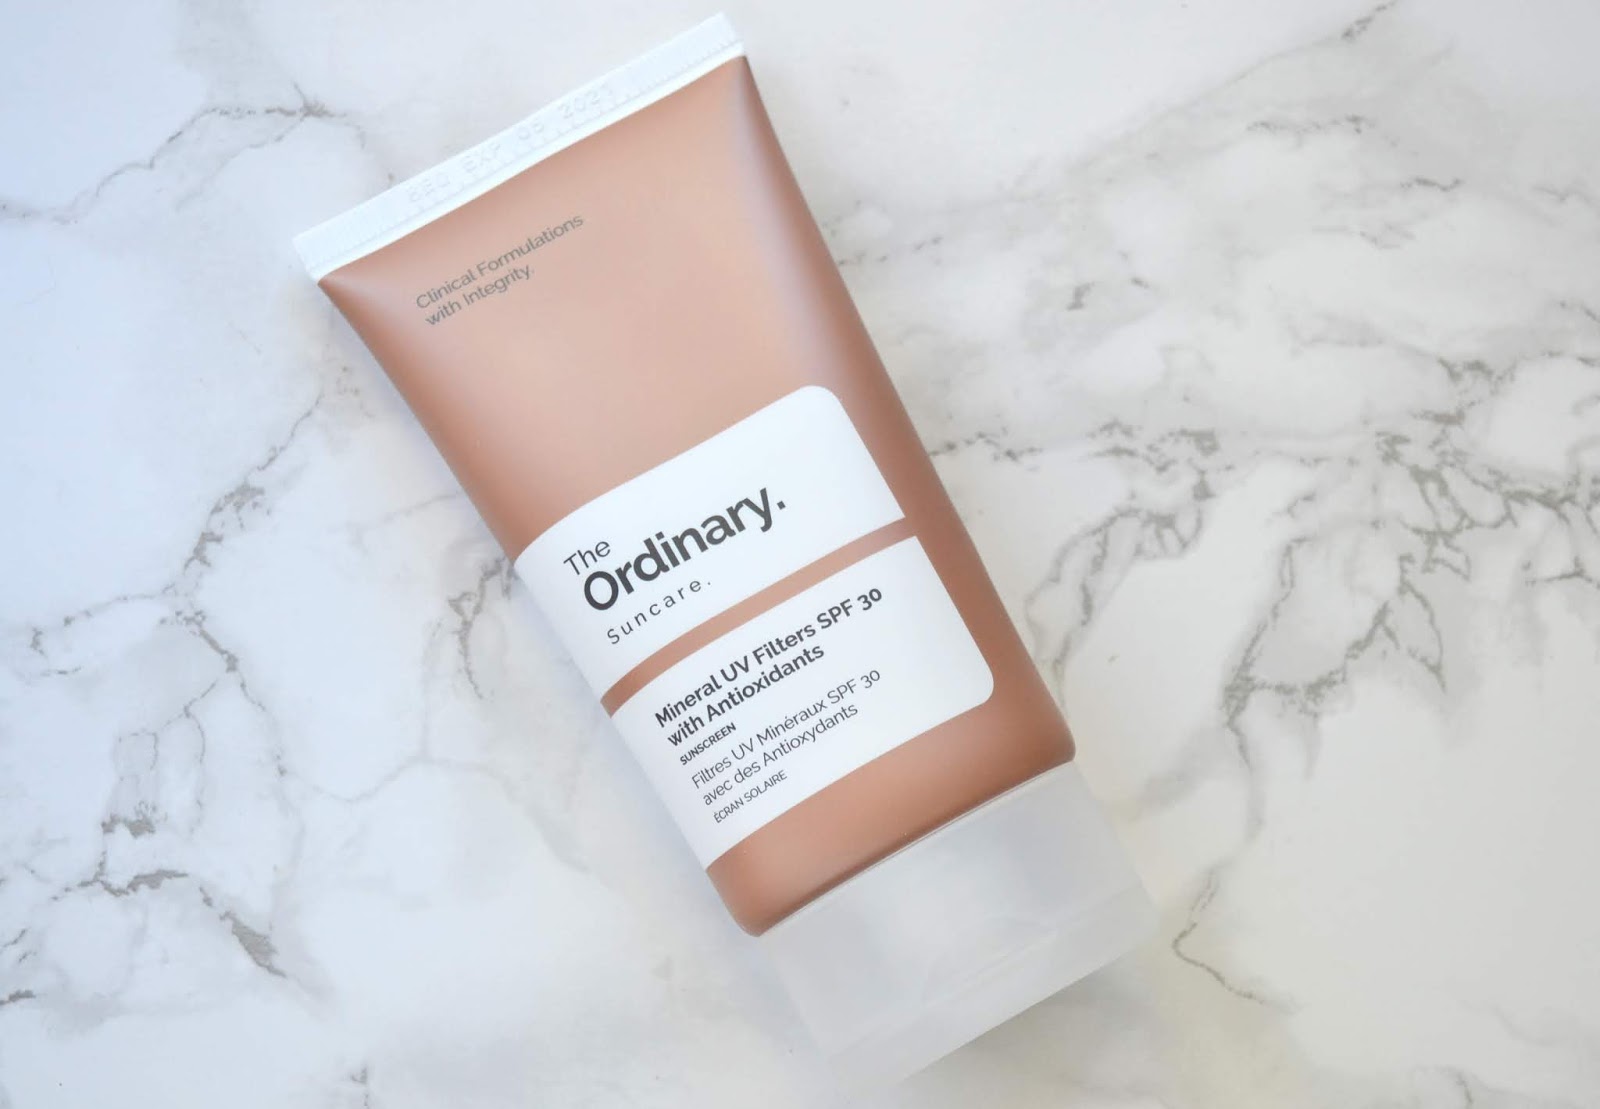 SUNSCREEN | The Ordinary Suncare Mineral UV Filters SPF 30 with Antioxidants  #SunscreenSunday | Cosmetic Proof | Vancouver beauty, nail art and  lifestyle blog